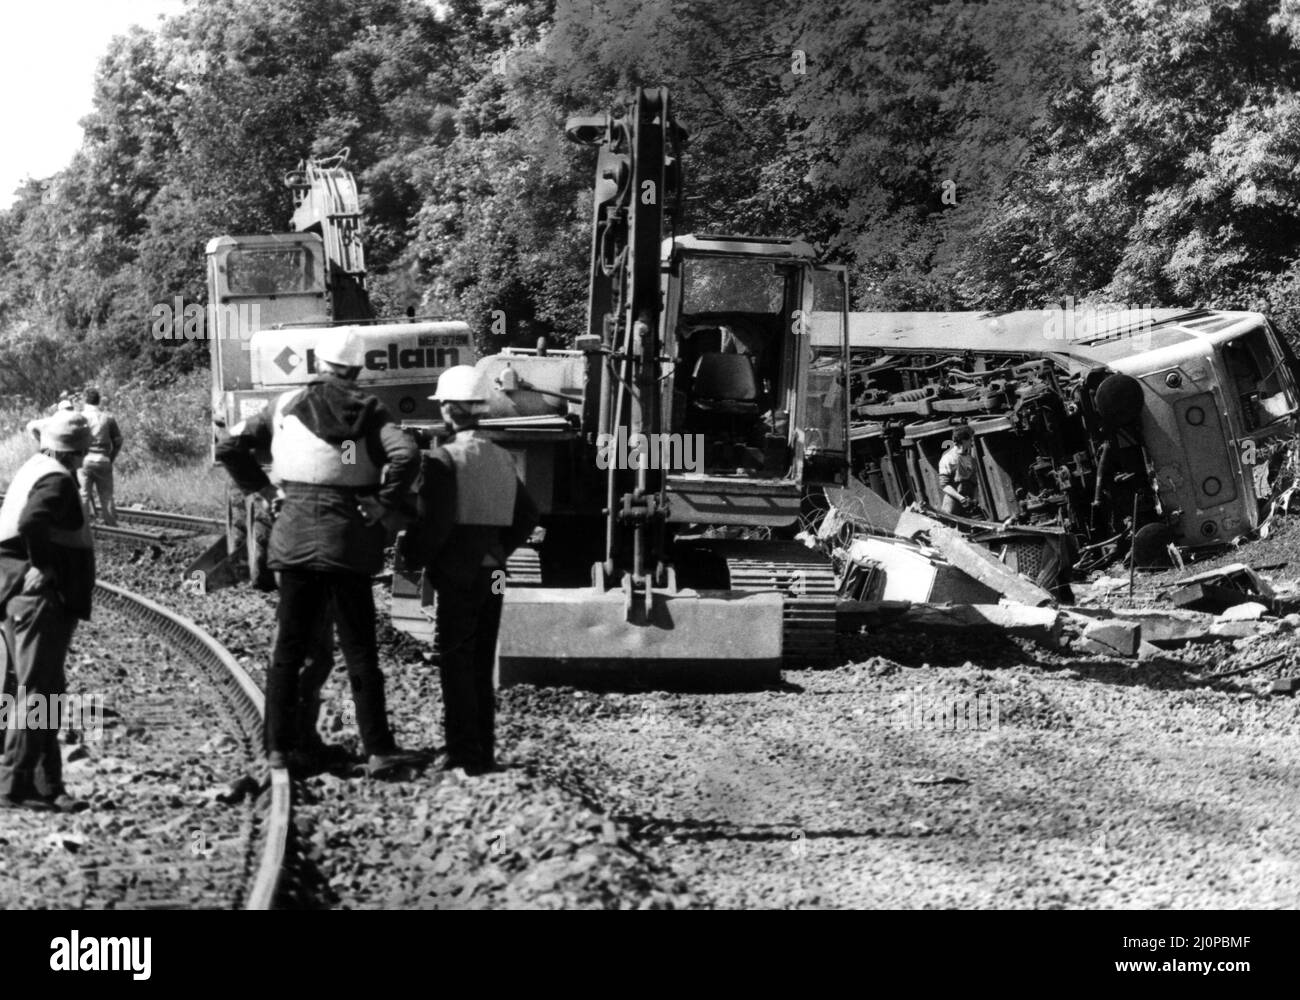 The crash of the Aberdeen to London sleeper train which careered off the track on the notorius Morpeth curve, just half a mile from the station. The crash happened at 10 minutes past midnight on 24th June, 1984   The engine is still on it's side as work goes on the clear the track Stock Photo